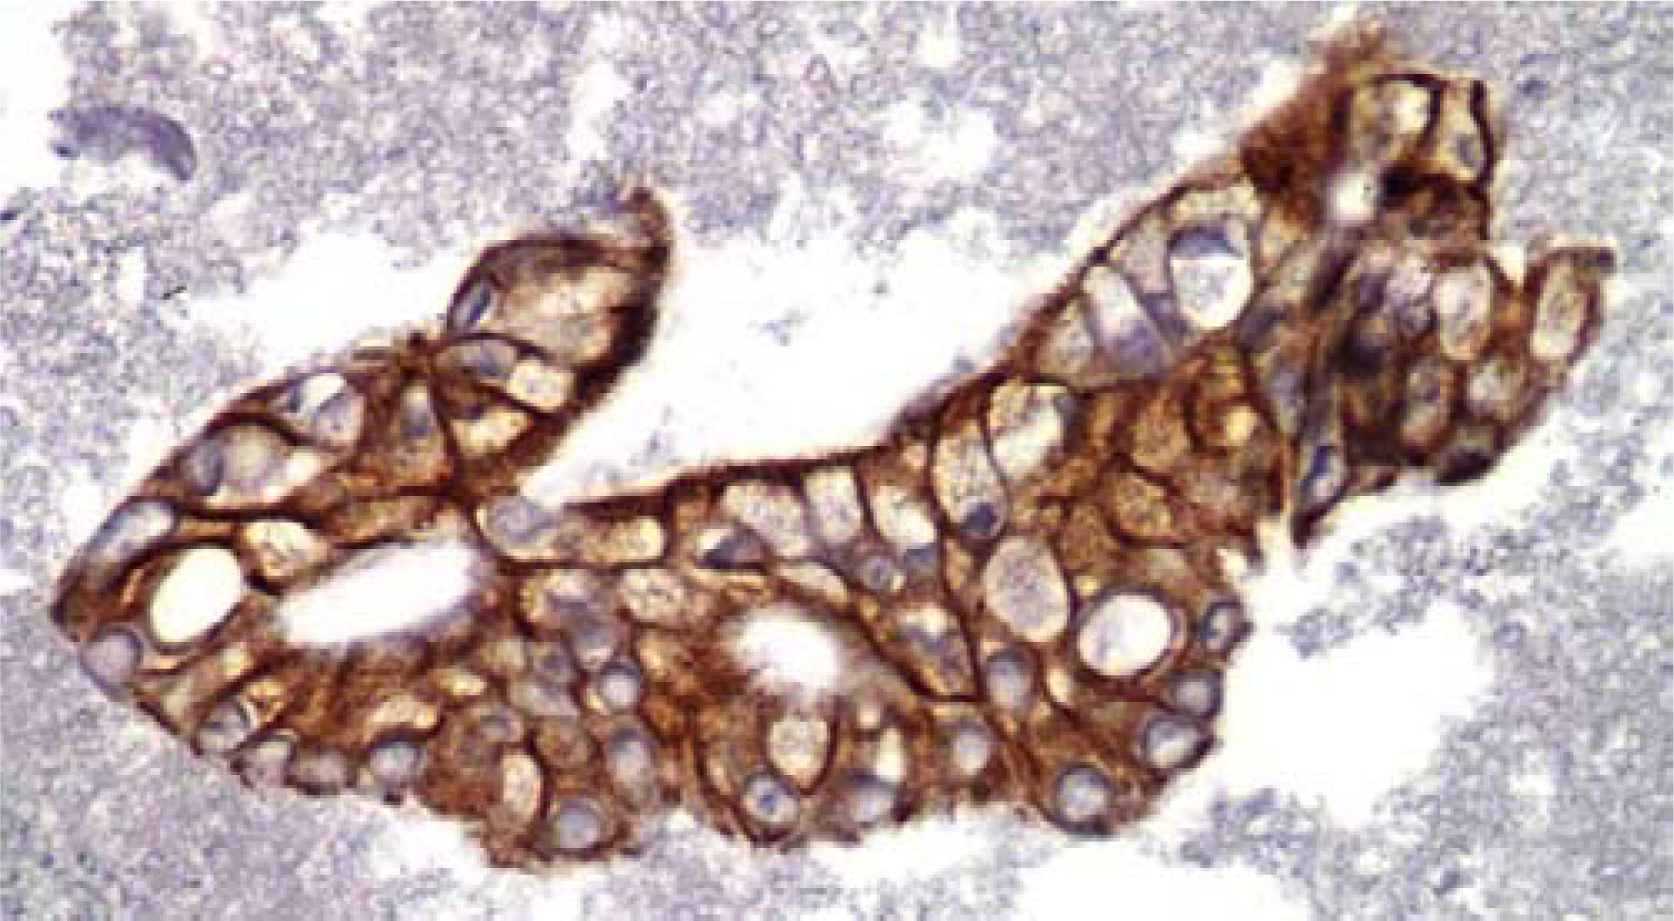 Representative fragment of Pancreatic Adenocarcinoma stained with CK19 (IHC, 40×).